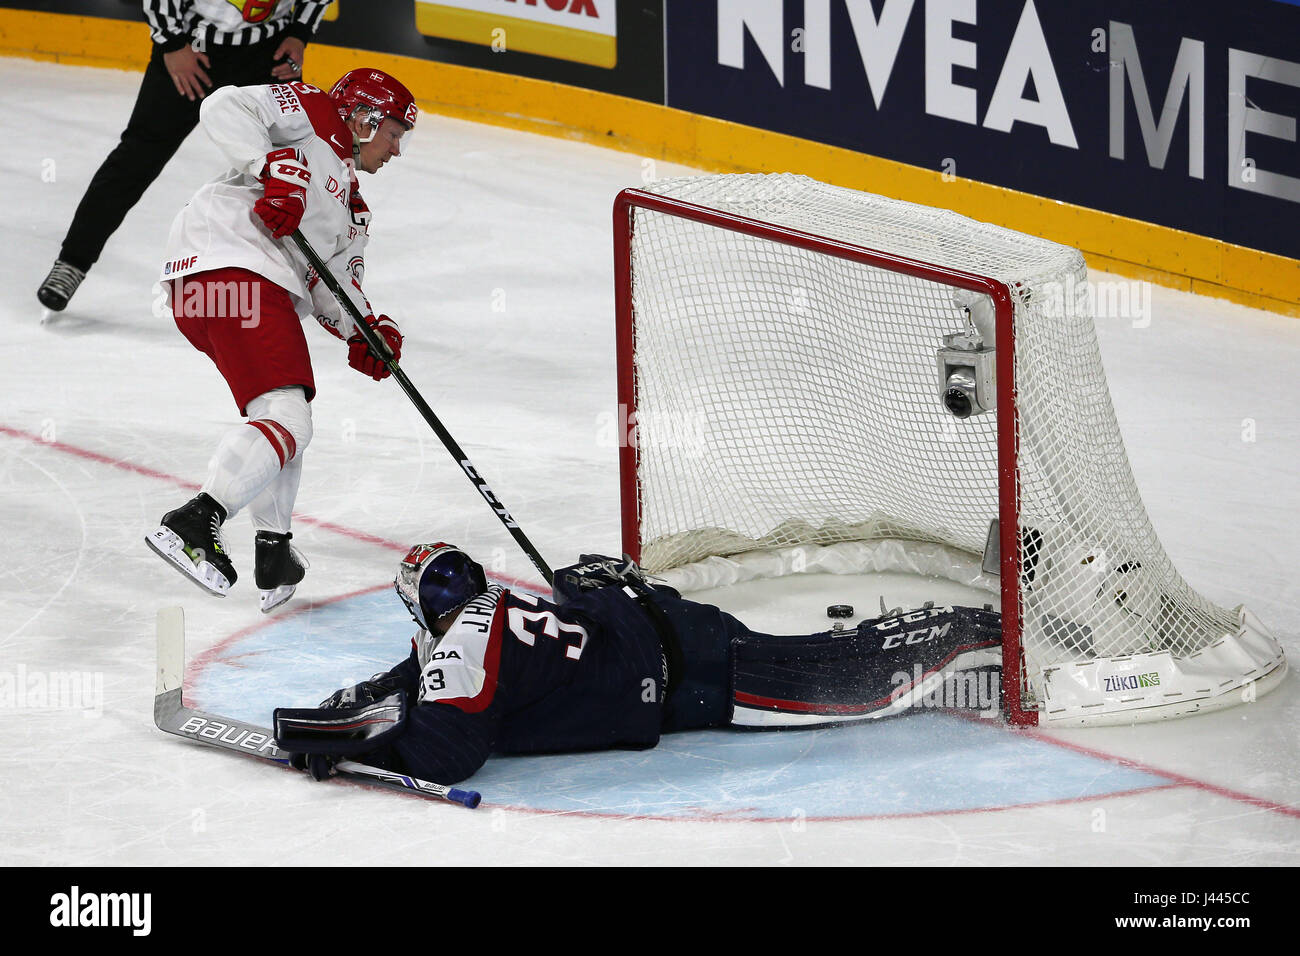 Cologne. 9th May, 2017. Morton Green(L) of Denmark scores the penalty as Slovakia's goalkeeper Julius Hudacek fails to save during the 2017 IIHF Ice Hockey World Championship Preliminary Round Group A Game between Slovakia and Denmark in Cologne, Germany on May 9, 2017. Denmark won 4-3. Credit: Ulrich Hufnagel/Xinhua/Alamy Live News Stock Photo